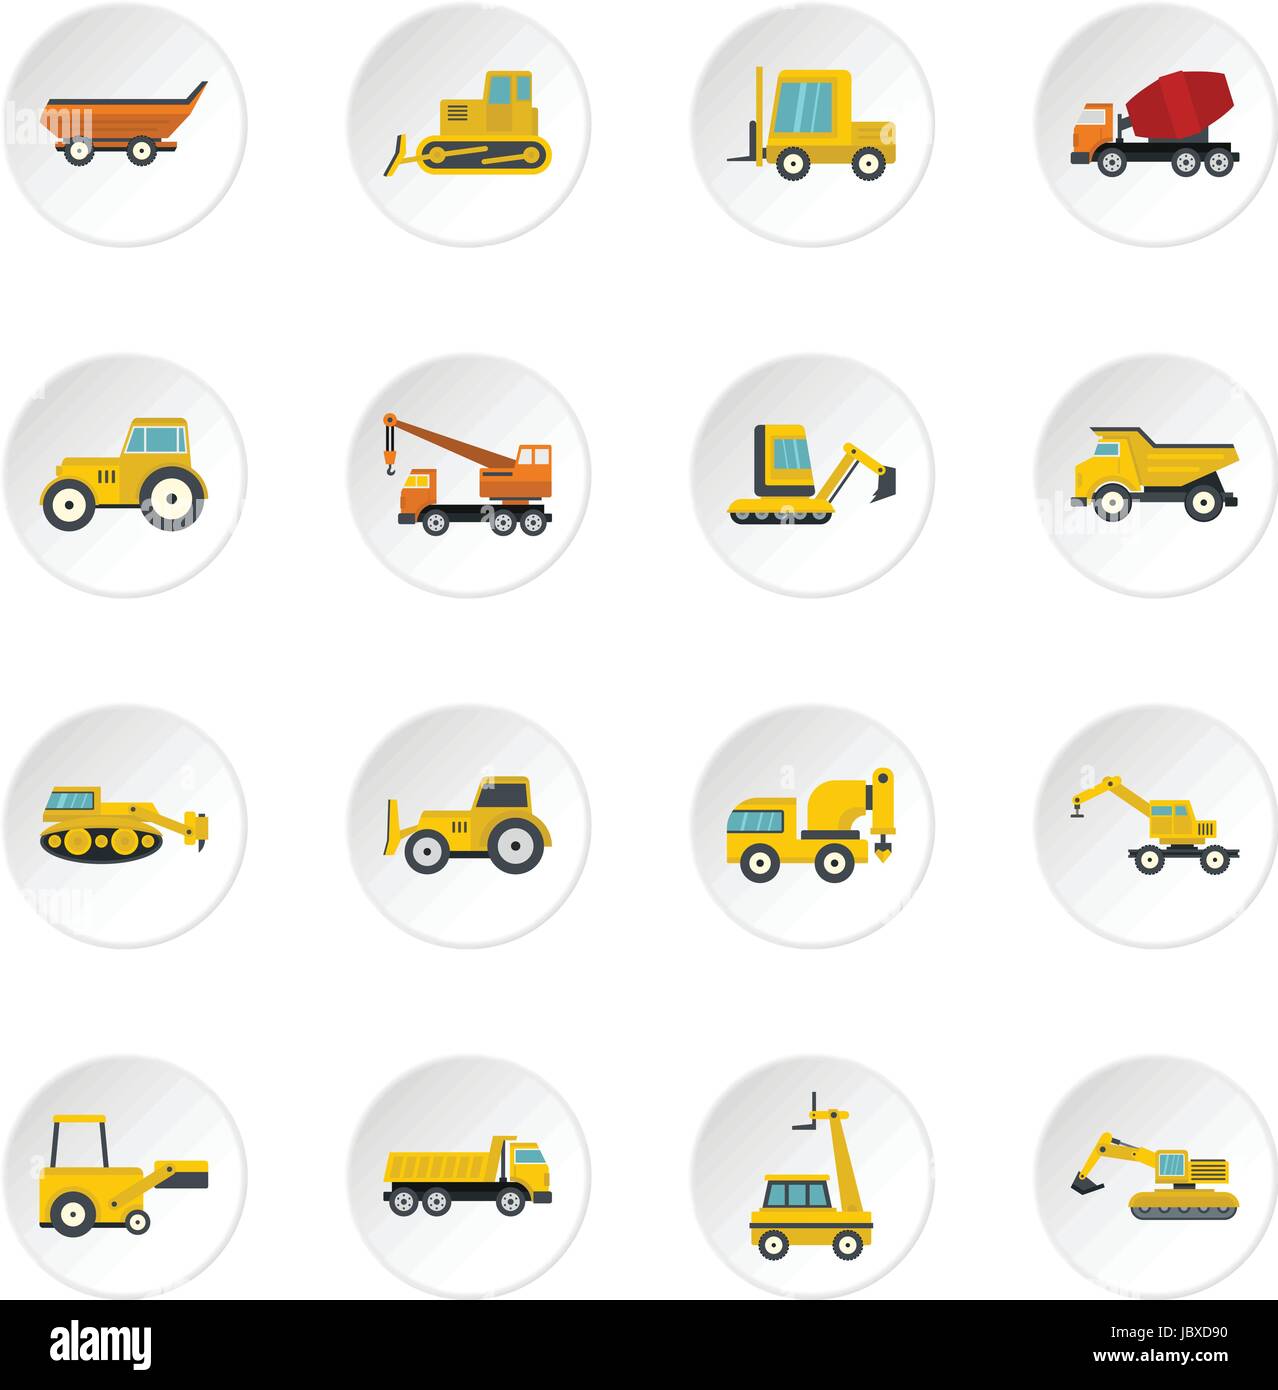 Building vehicles icons set in flat style Stock Vector